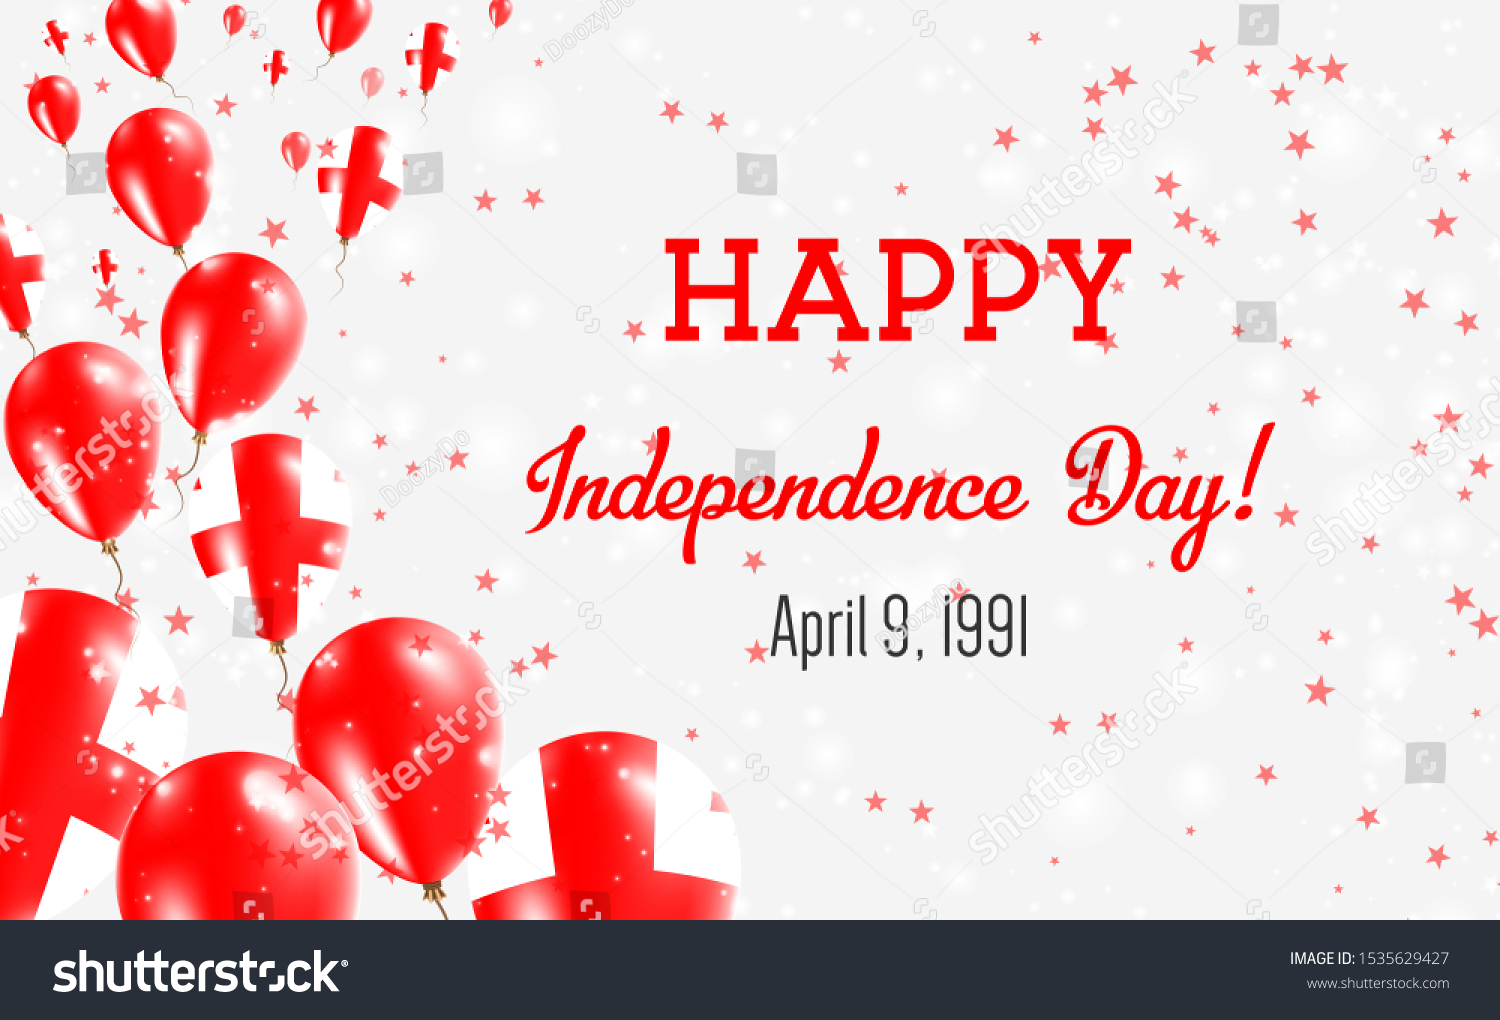 SVG of Georgia Independence Day Greeting Card. Flying Balloons in Georgia National Colors. Happy Independence Day Georgia Vector Illustration. svg